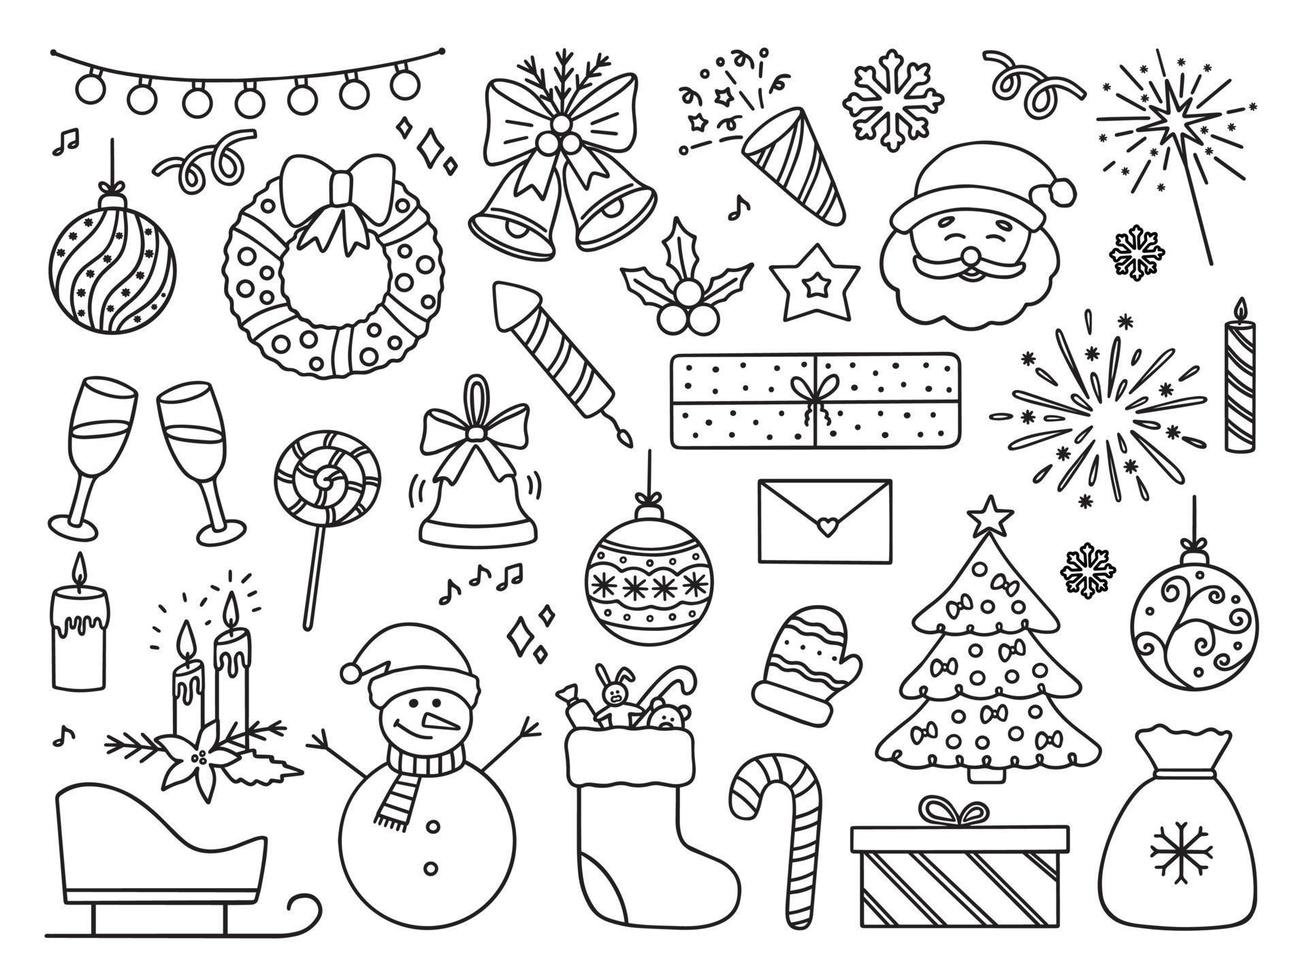 Hand drawn set of Christmas doodle icons. New year party in sketch style. Vector illustration isolated on white background